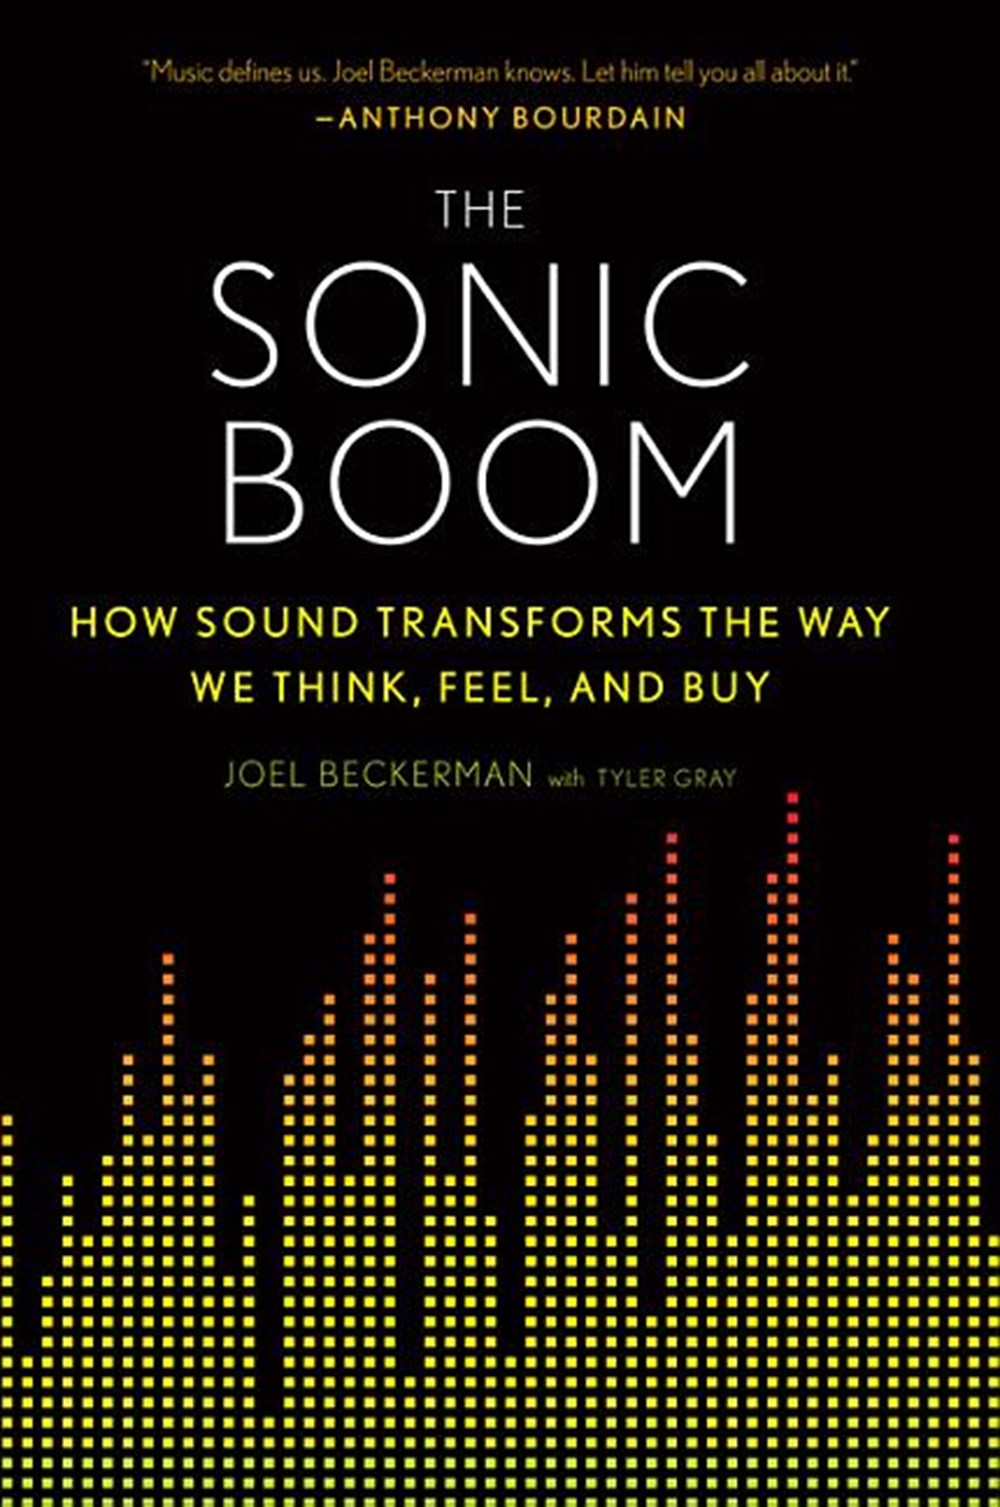 Sonic Boom: How Sound Transforms the Way We Think, Feel, and Buy